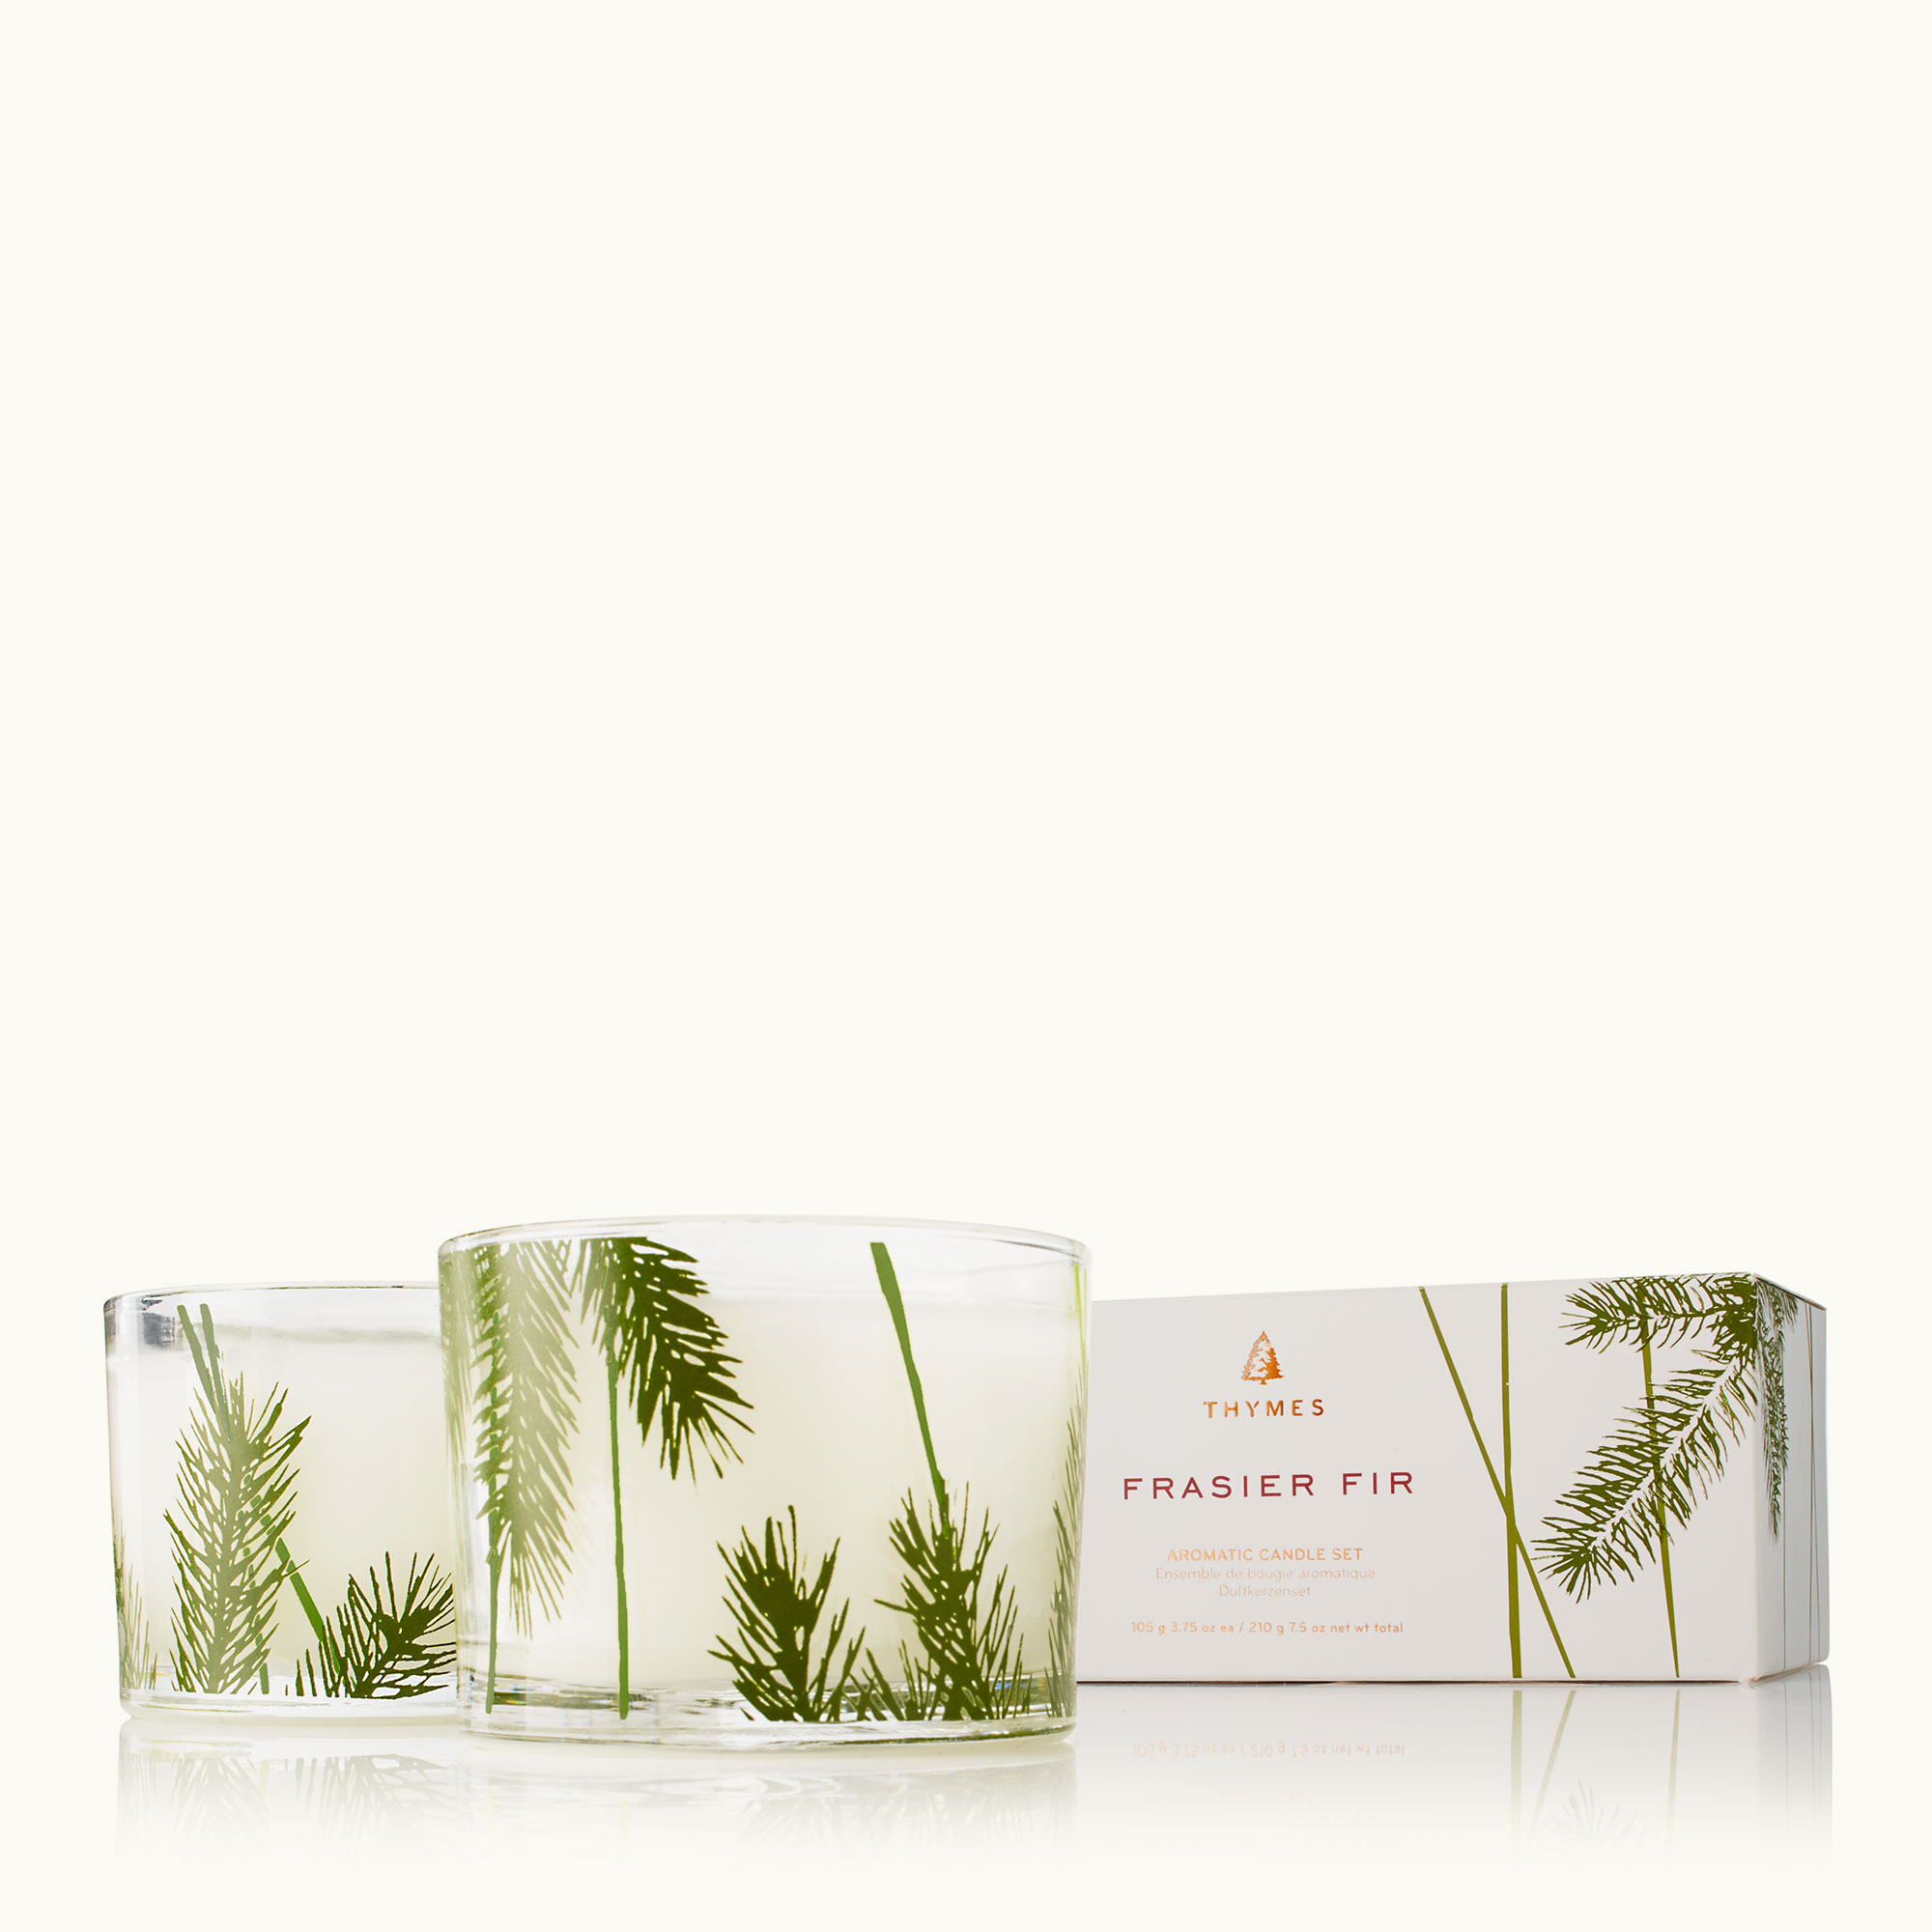 Thymes Frasier Fir Statement Candle - Silver Pine Needle 2oz